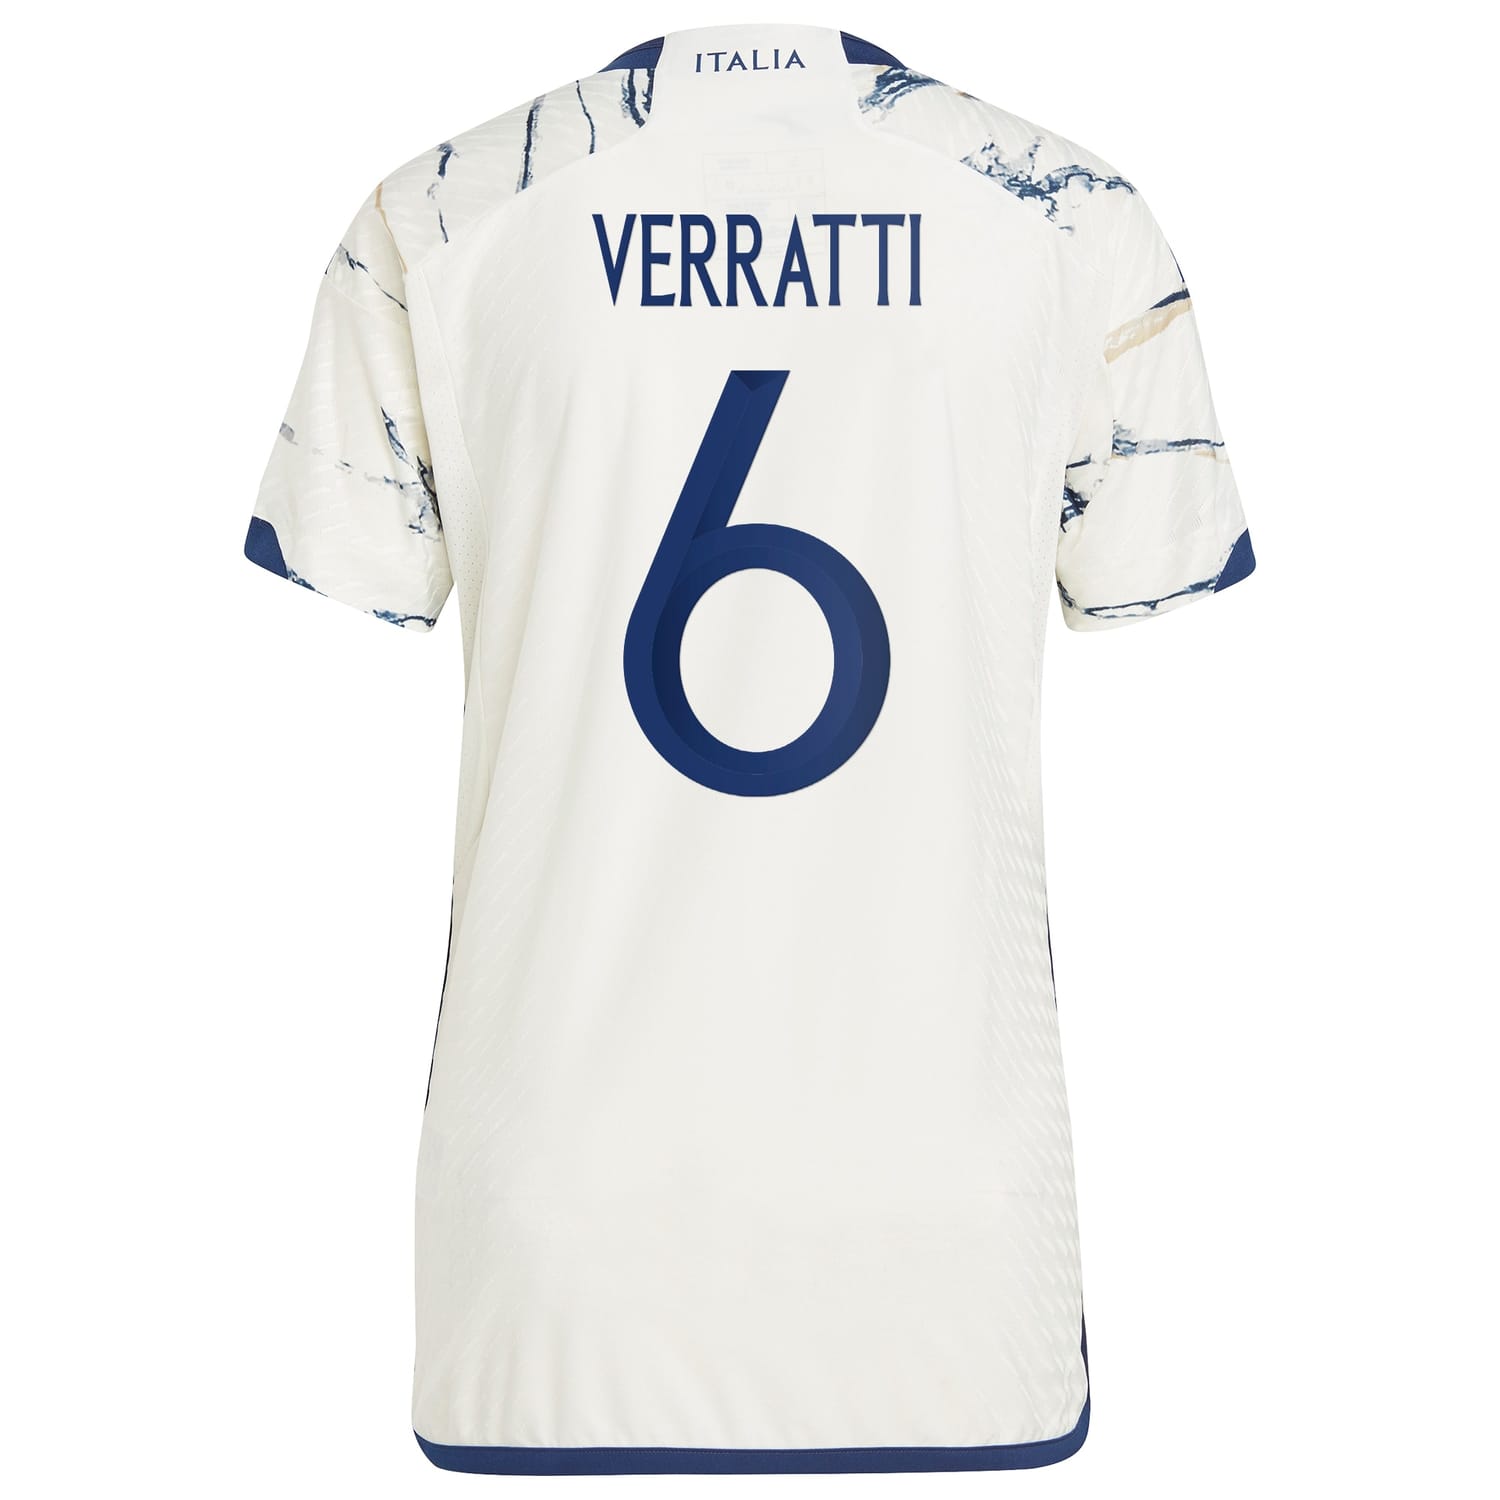 Italy National Team Away Authentic Jersey Shirt White 2023-24 player Marco Verratti printing for Men